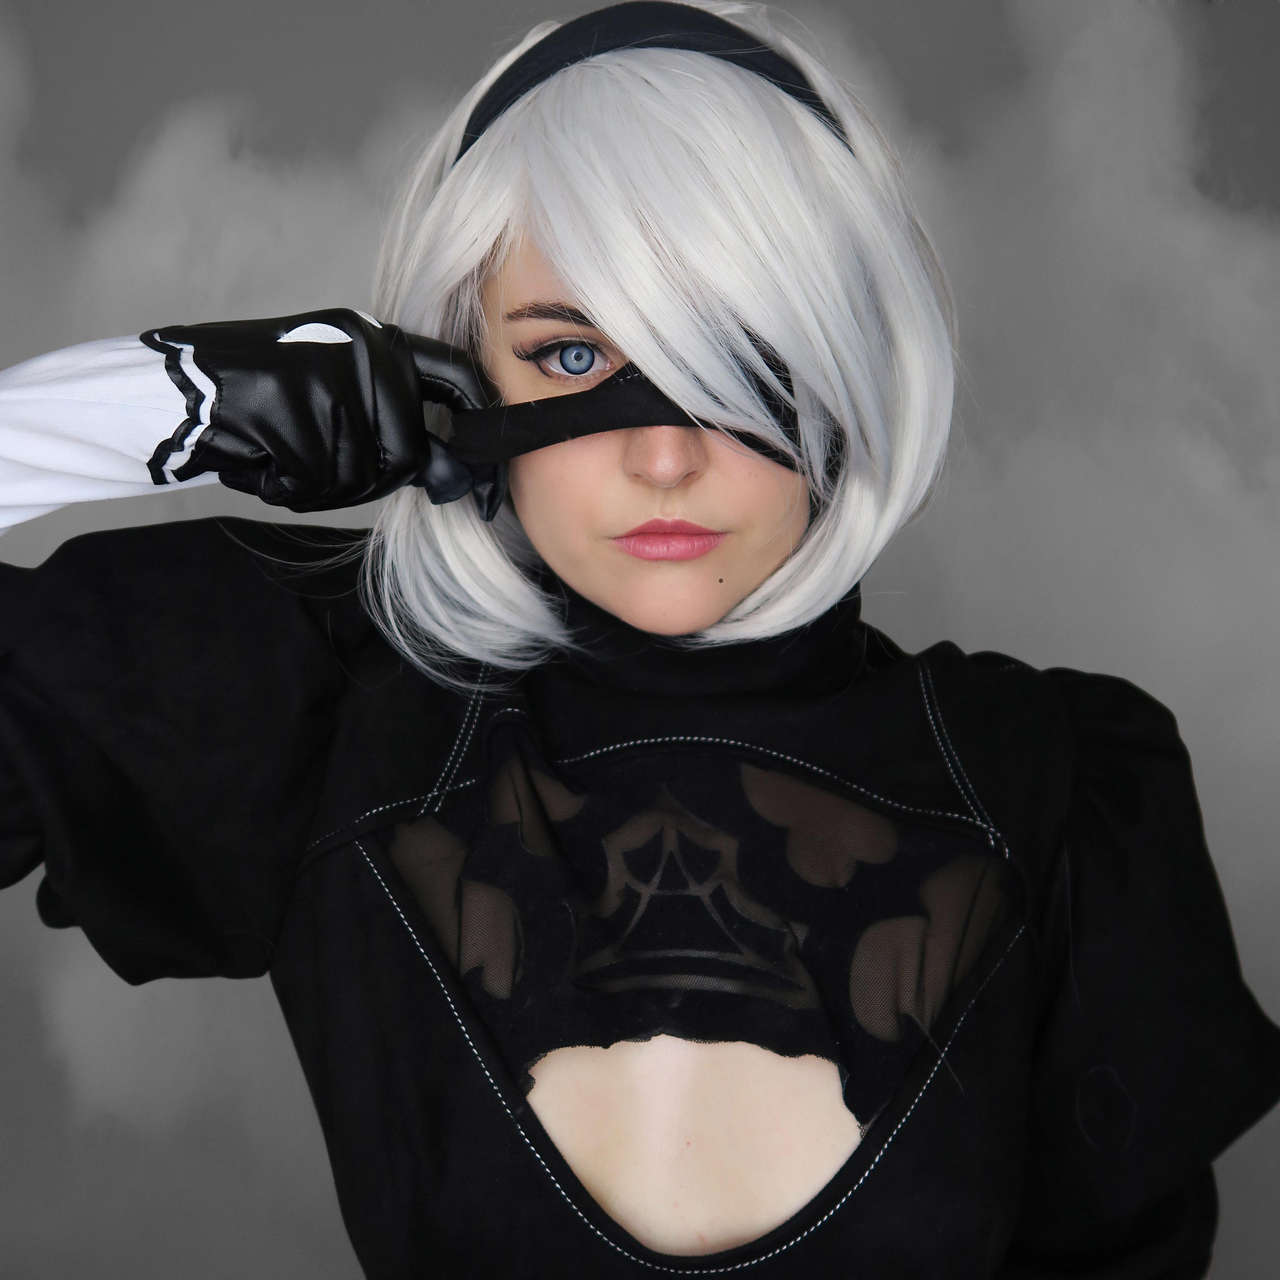 Emperiam As 2b From Nier Automat